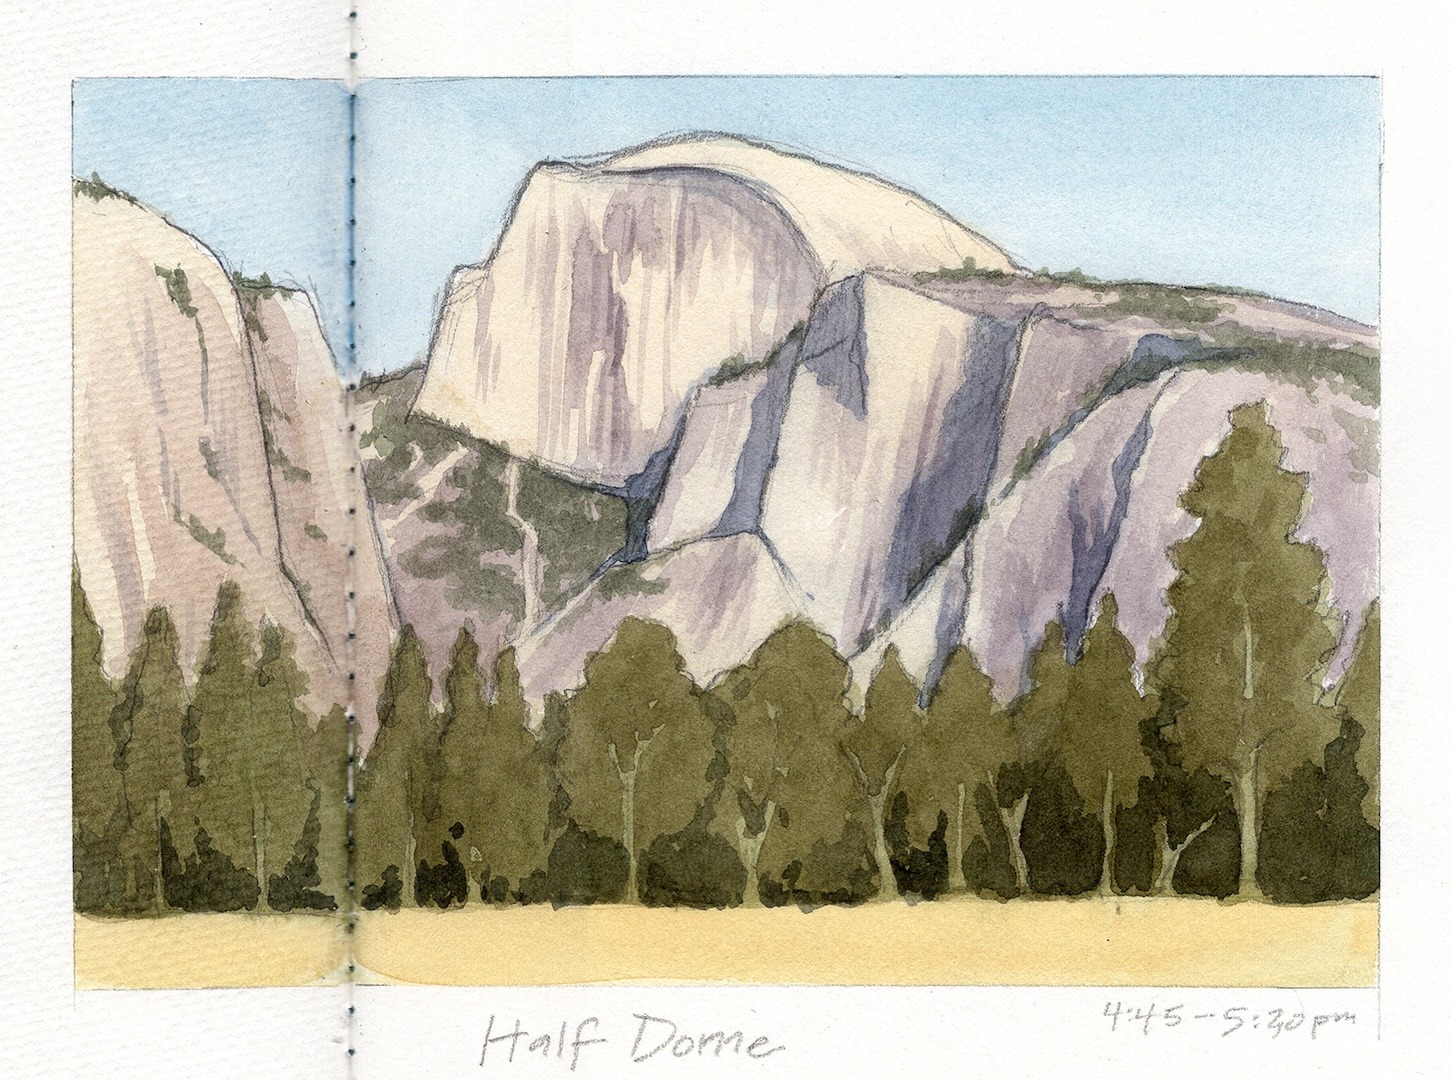 Watercolor sketch of a Yosemite landscape by artist and educator Andrea Dingeldein